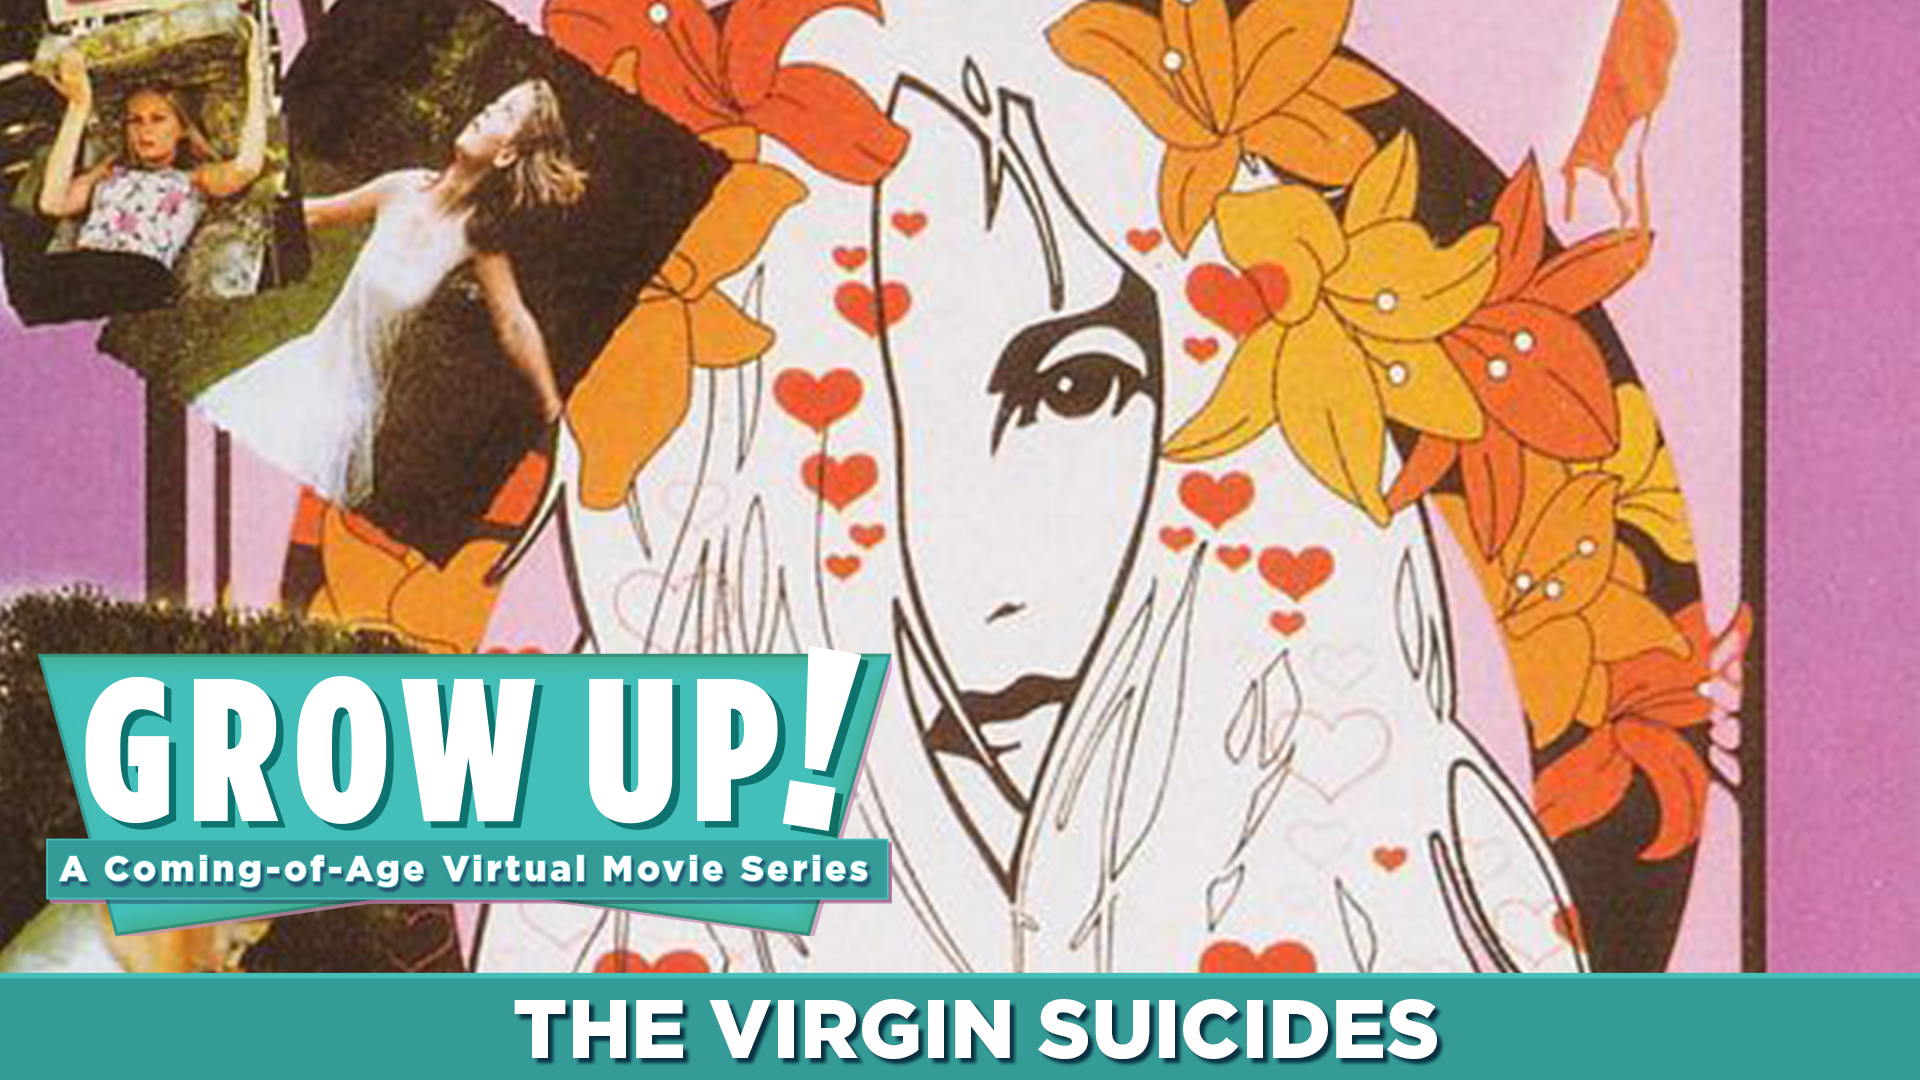 Grow Up! A Coming-of-Age Virtual Movie Series - The Virgin Suicides